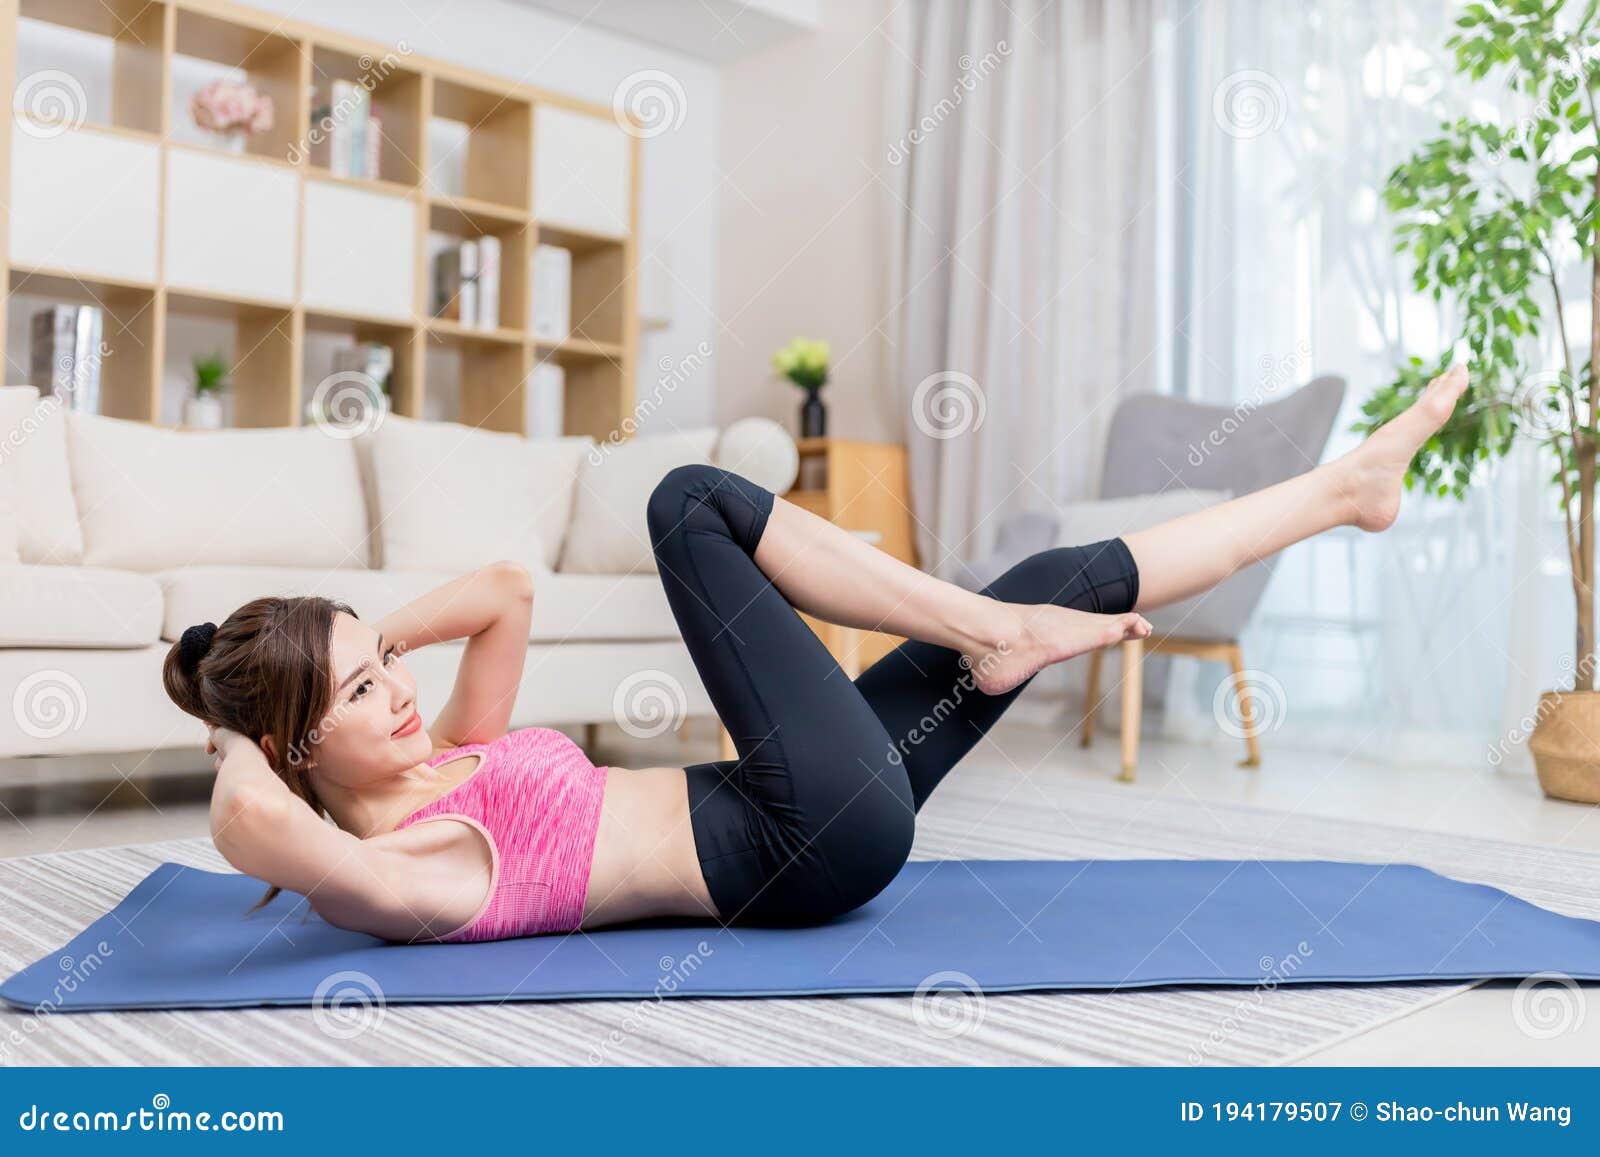 Woman Doing Exercise at Home Stock Image - Image of cardio, aerobic ...